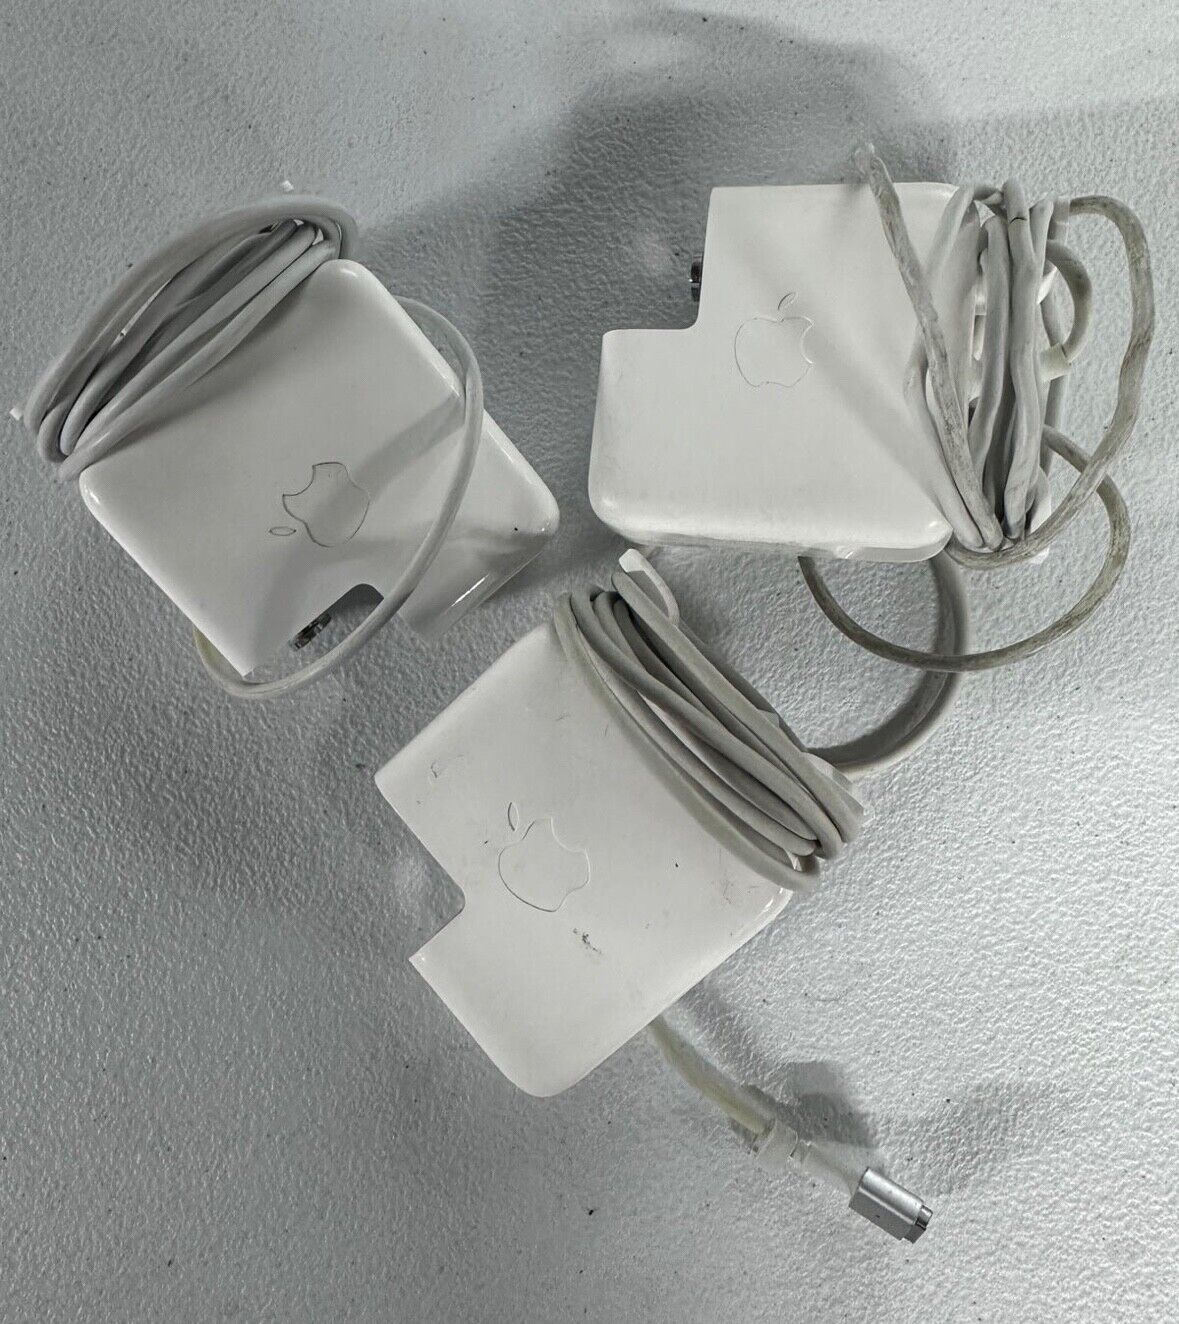 3x Authentic Apple (45W) MagSafe 2 Power Adapter - White bulk